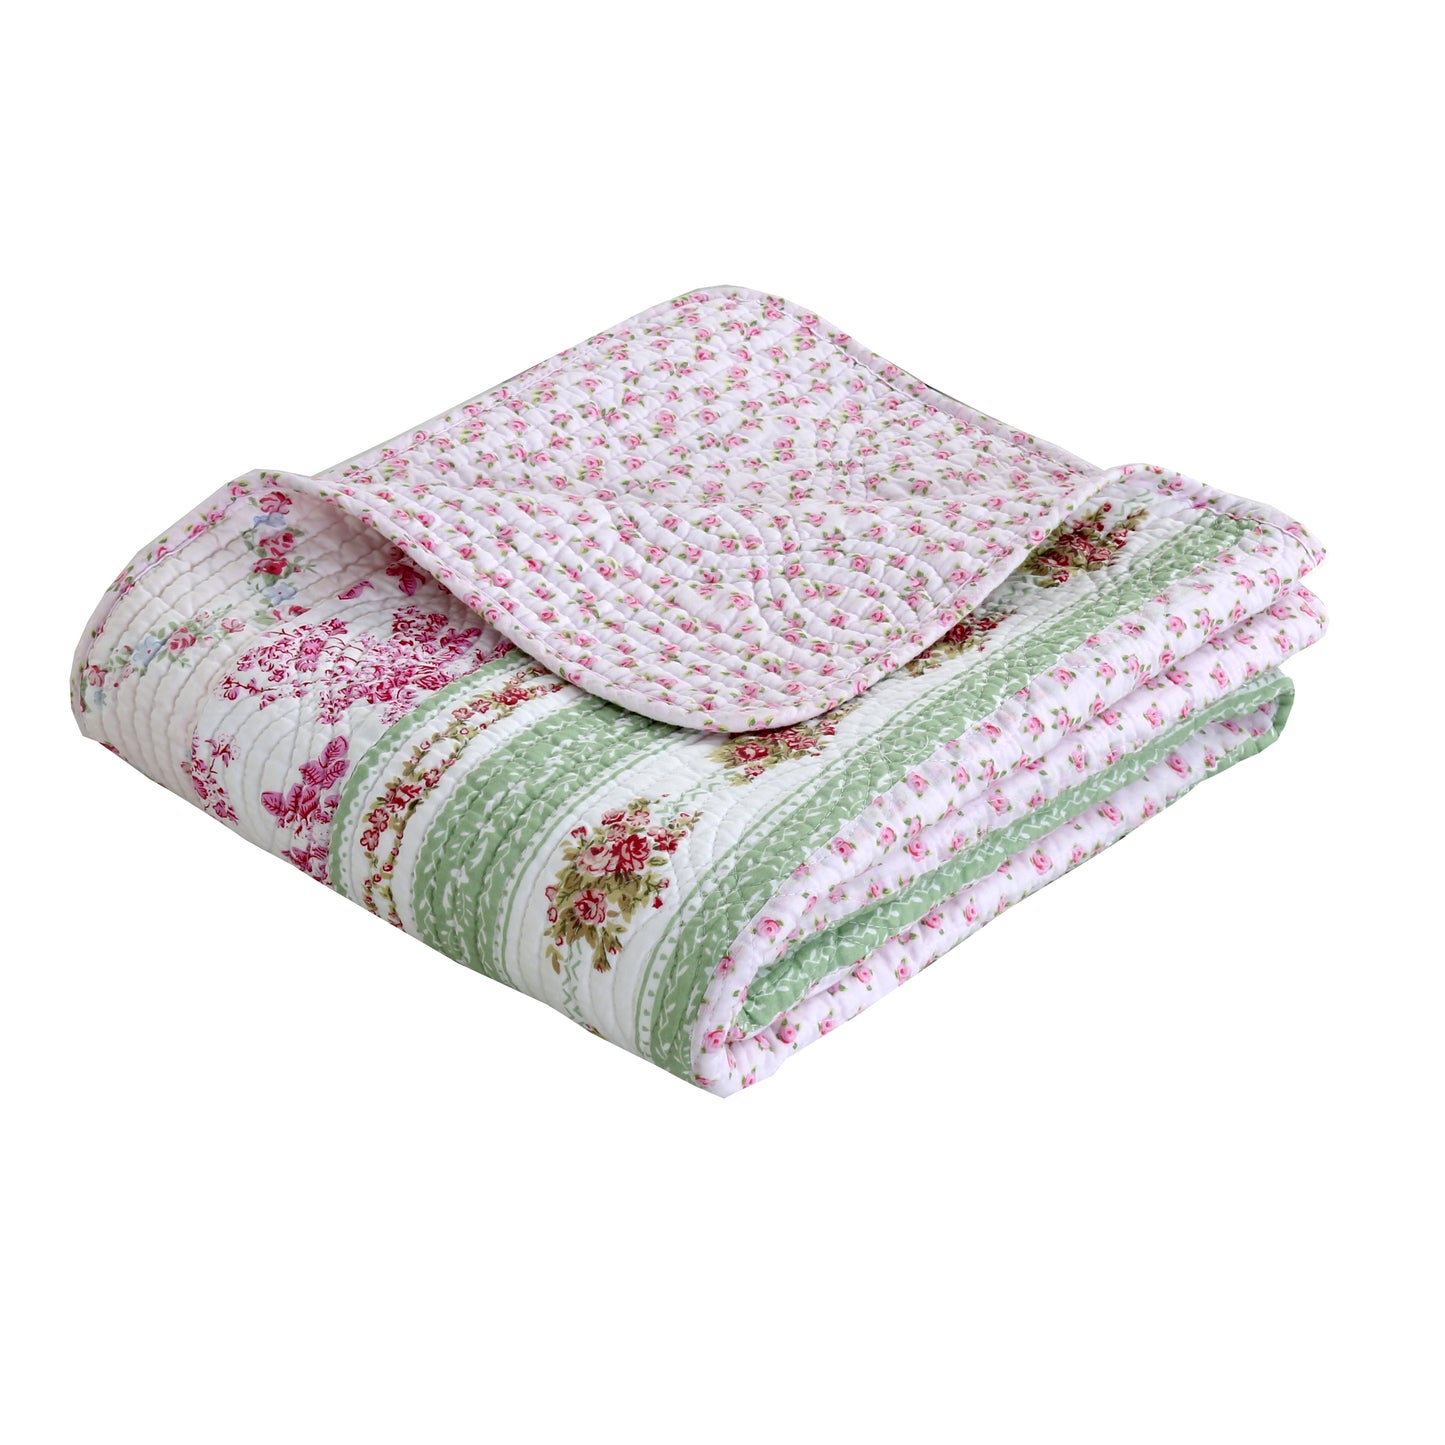 Wild Rose Enchantment Floral Bloom Garden Stripe Quilted Reversible Throw Blanket